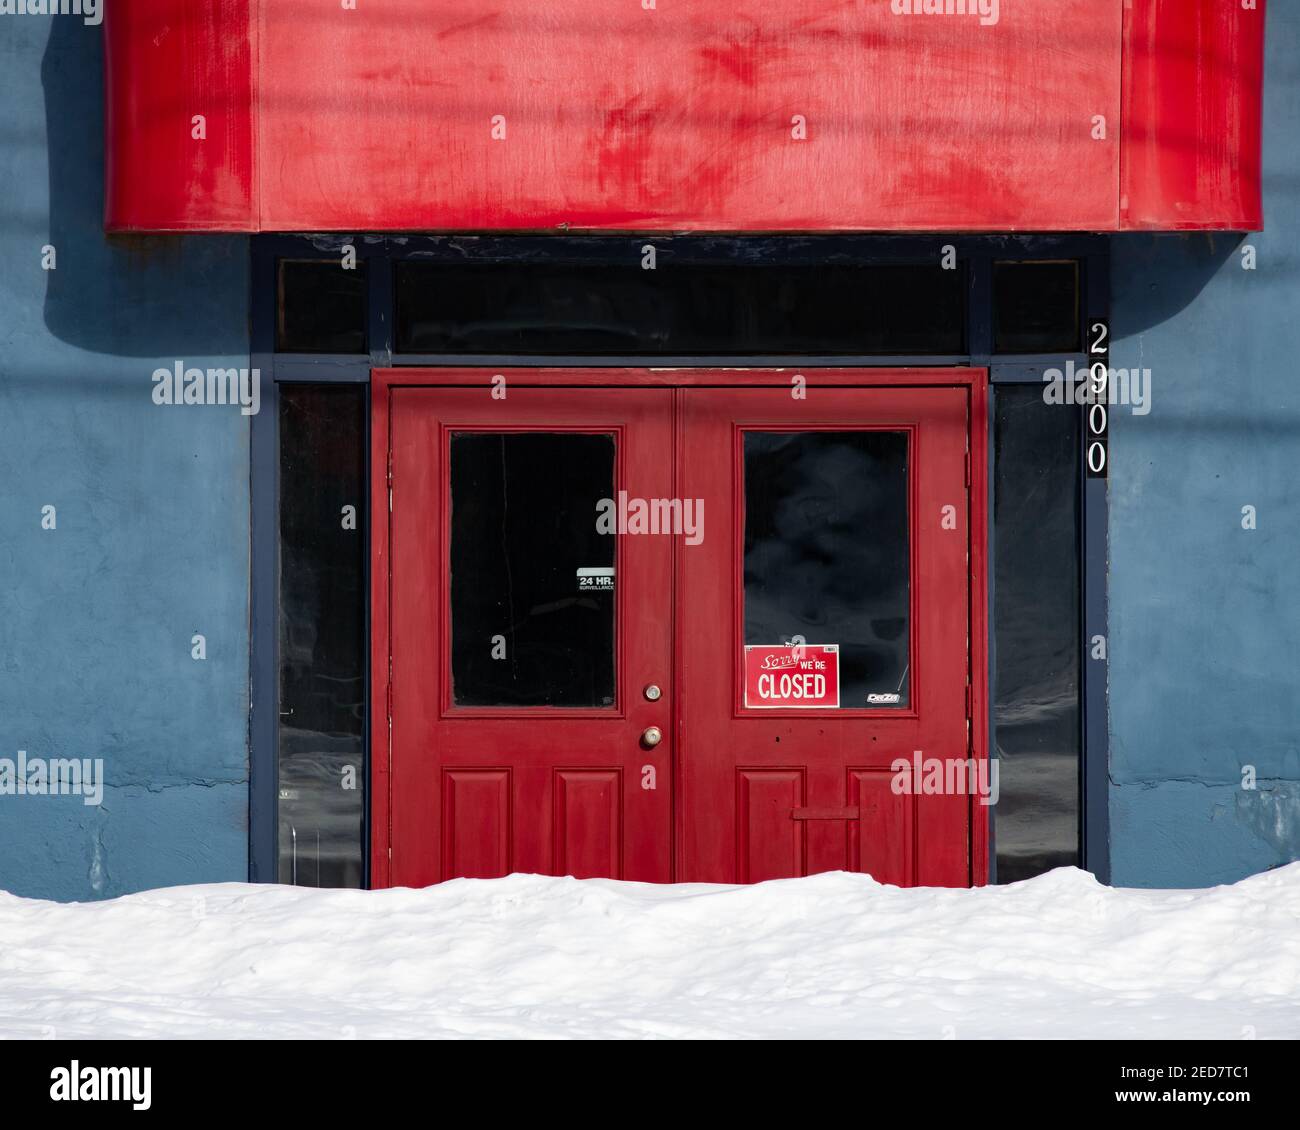 Red doors entrance with a closed sign on a blue building blocked by a snow bank in Speculator, NY USA Stock Photo